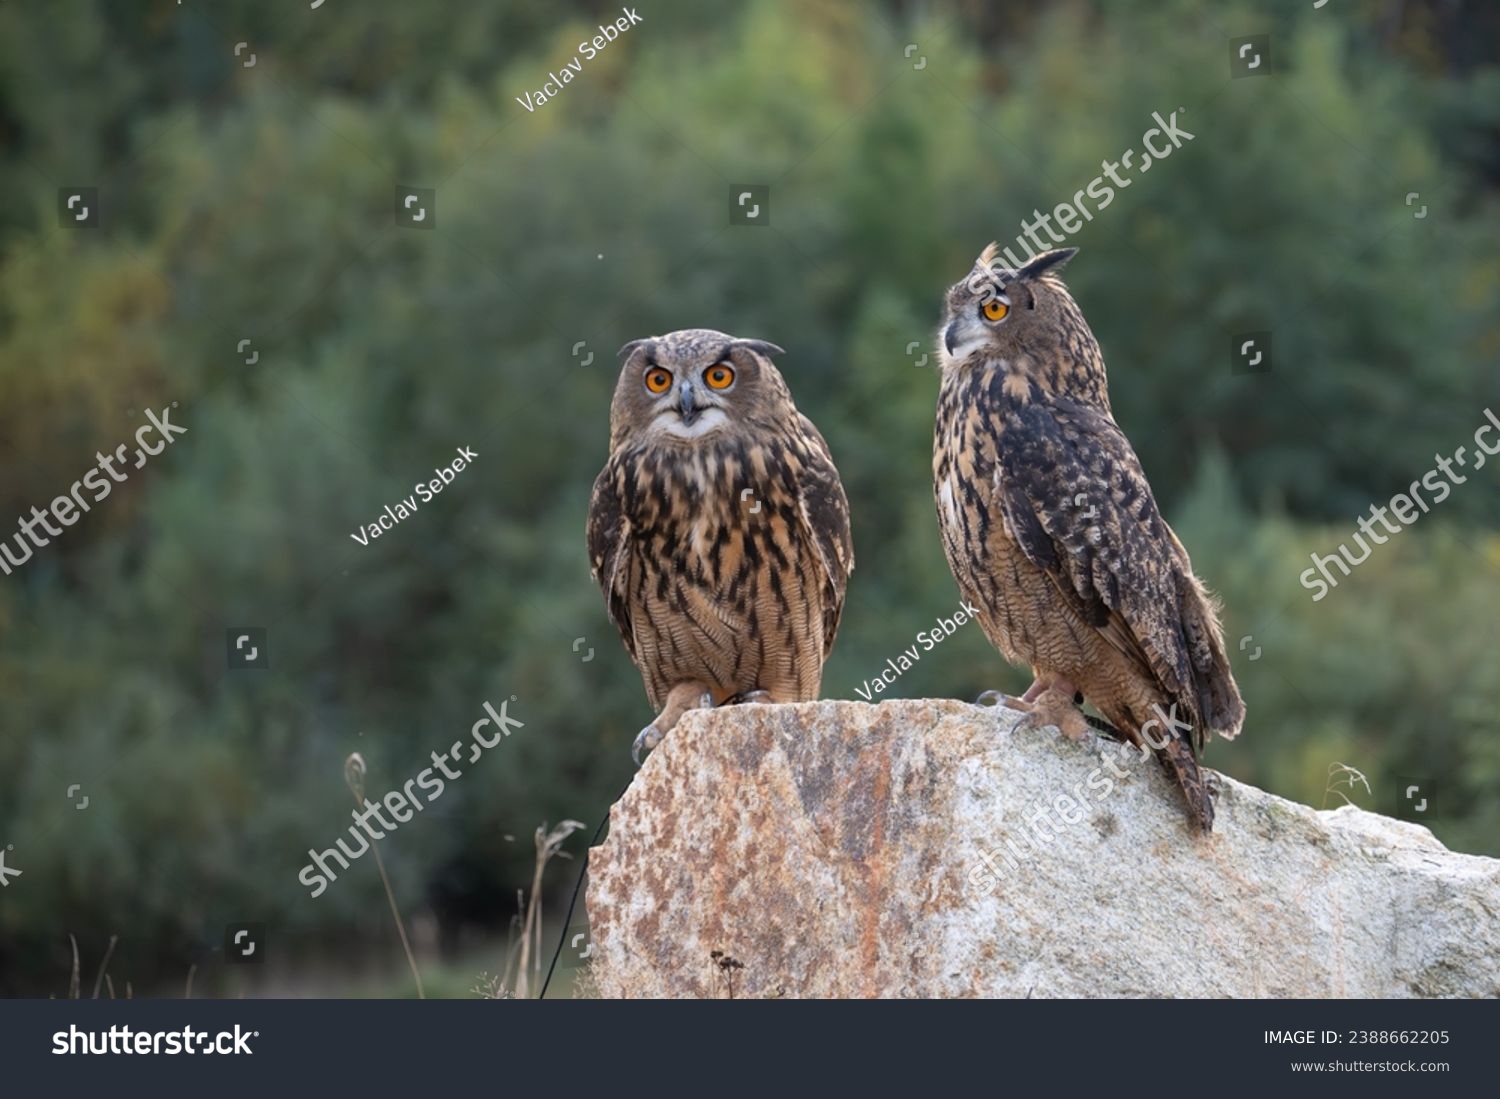 The great eagle owl (Bubo bubo) is a large species of owl in the Strigidae family. It is the largest European owl. #2388662205